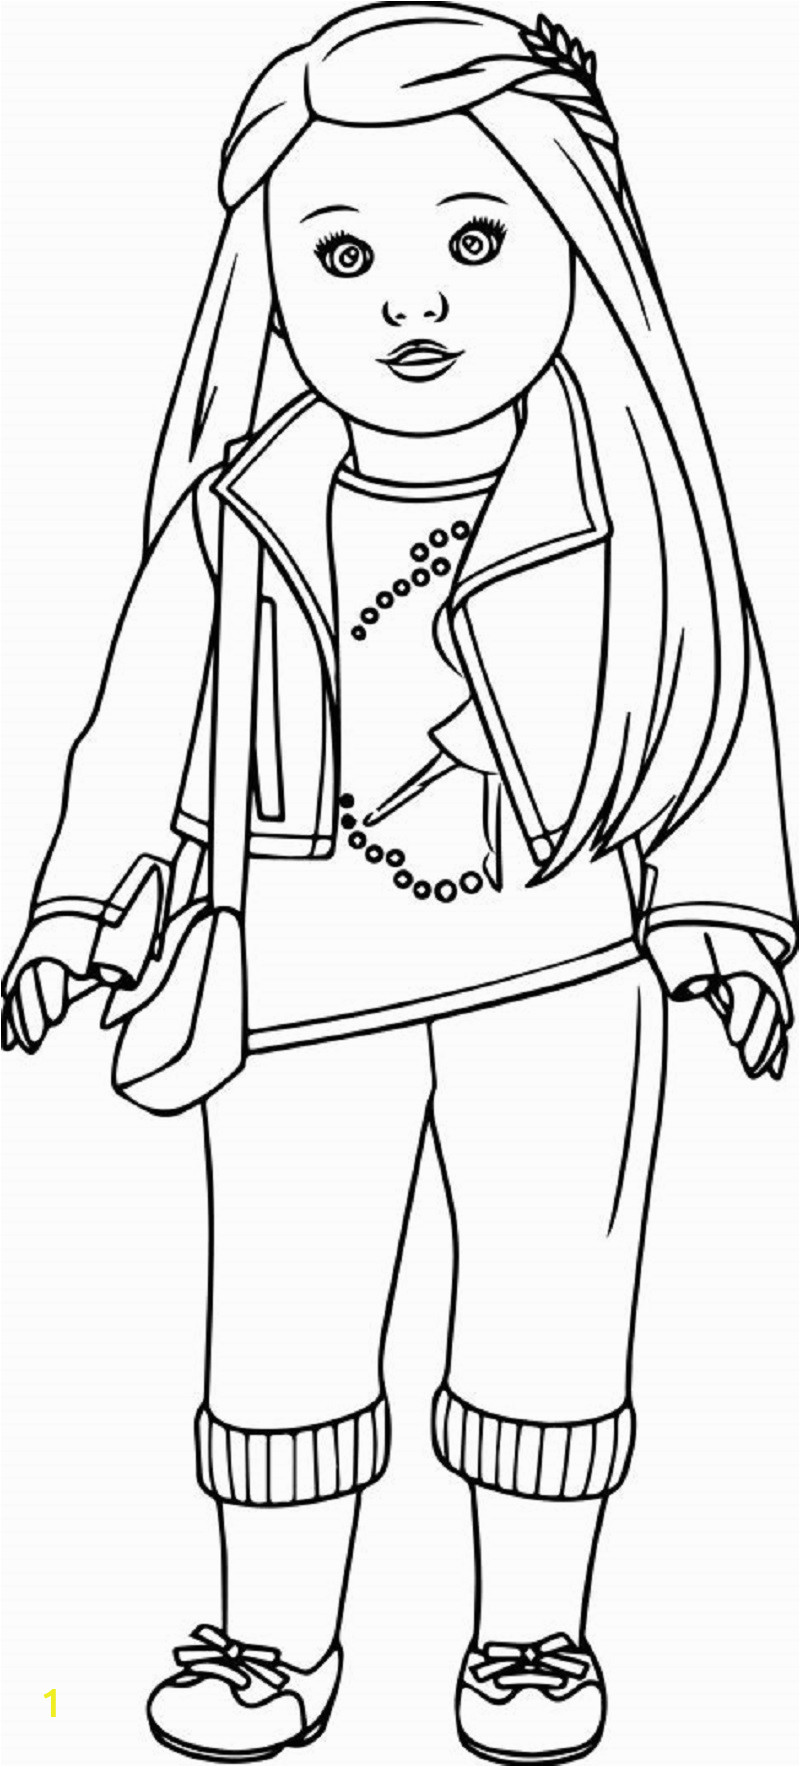 American Girl Coloring Pages to Print American Girl Doll Coloring Pages